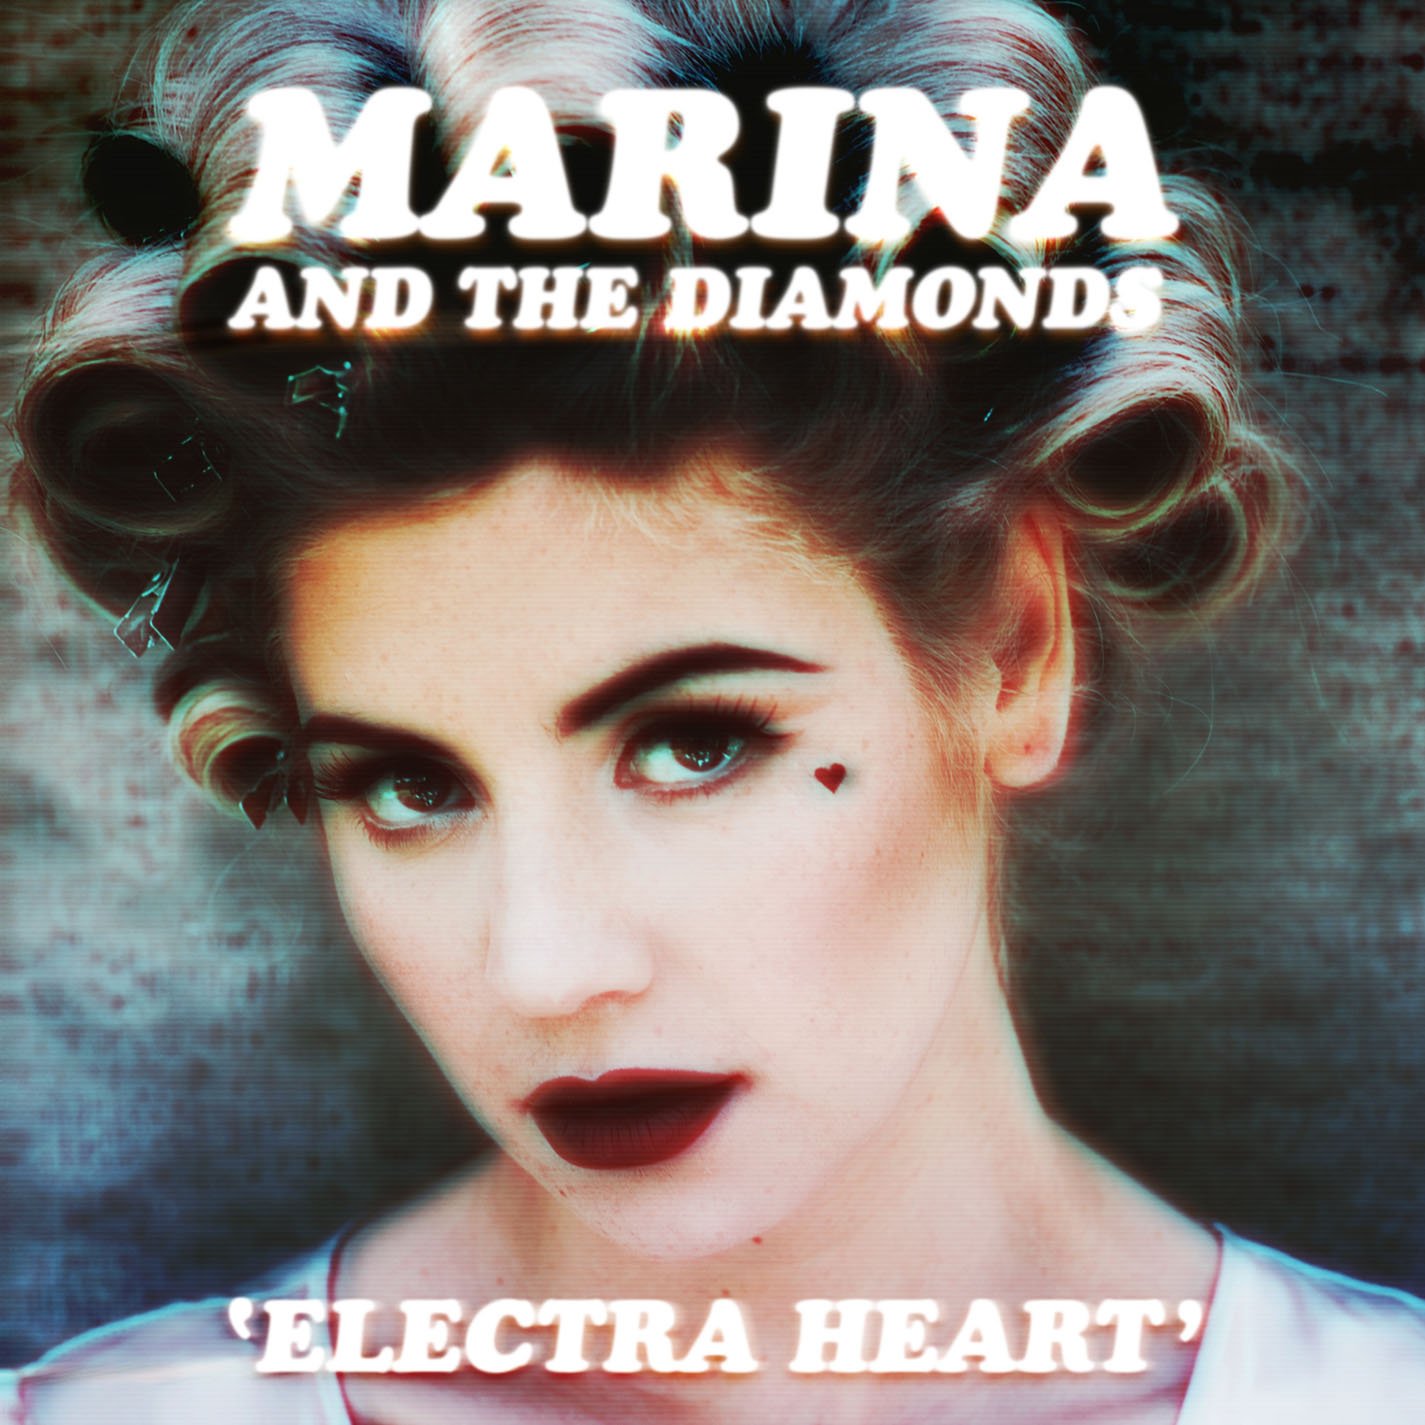 An image of the cover of the album 'Electra Heart', showing a young woman wearing hair rollers, with a small heart drawn with makeup just below her left eye, as if a tear.